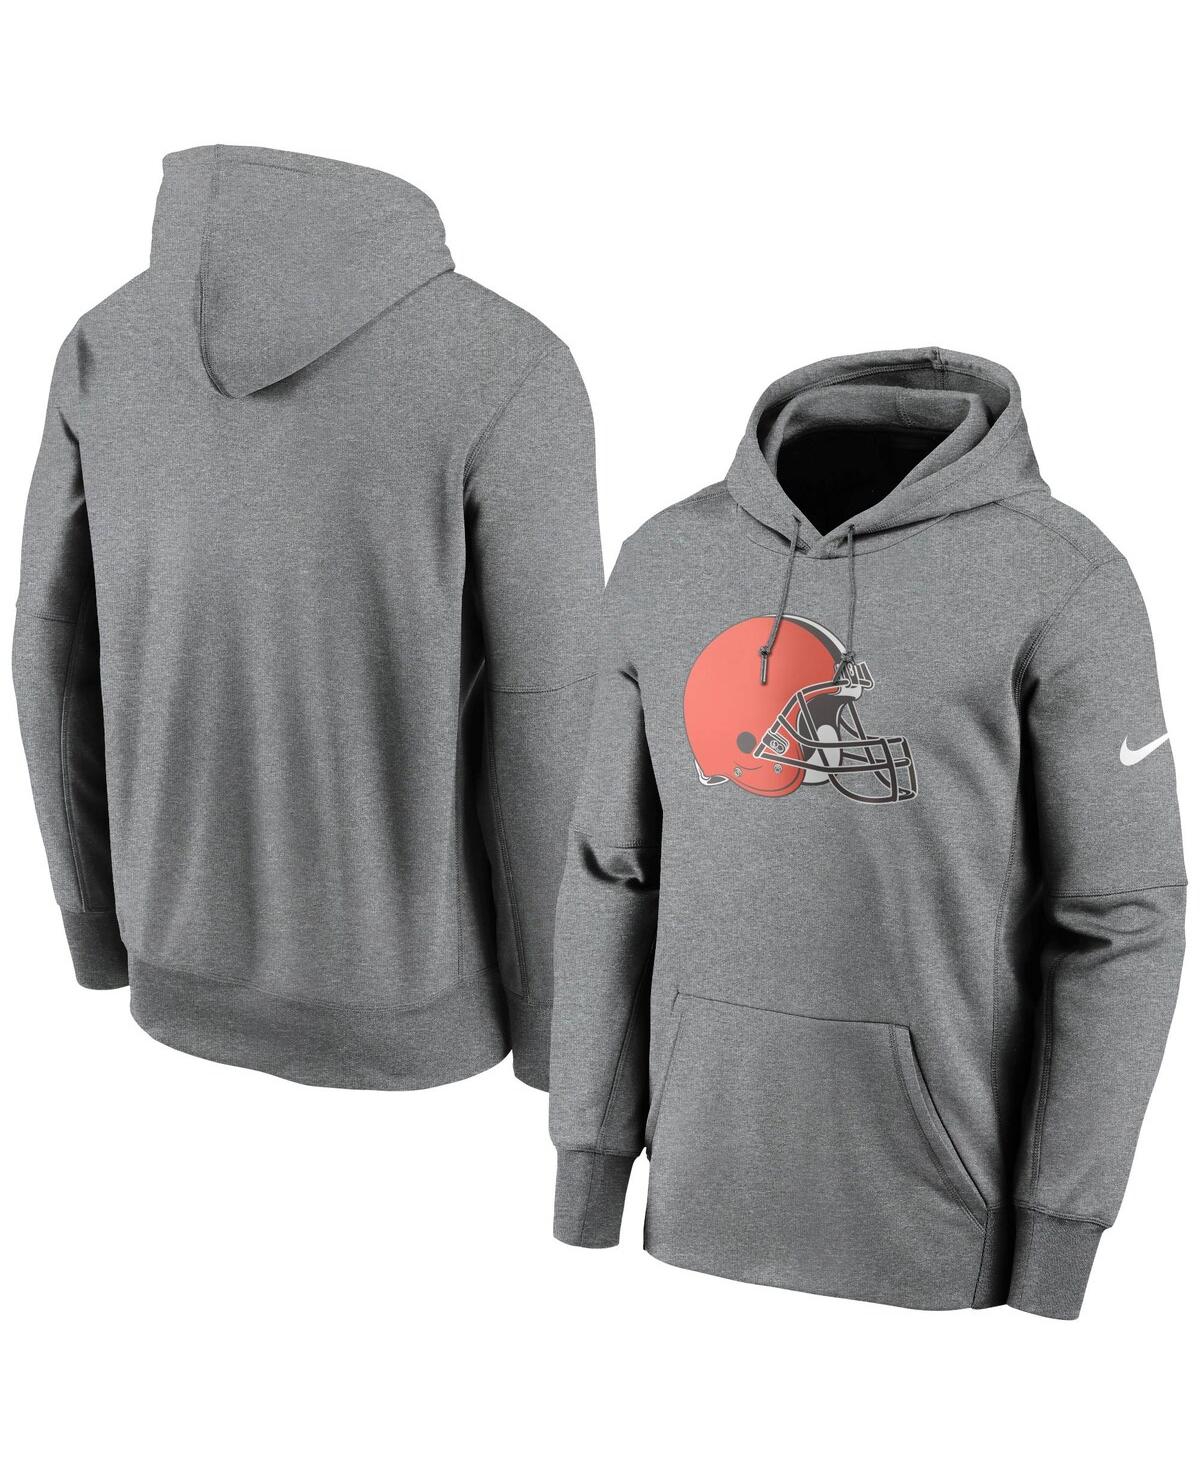 NIKE MEN'S NIKE HEATHERED GRAY CLEVELAND BROWNS FAN GEAR PRIMARY LOGO PERFORMANCE PULLOVER HOODIE